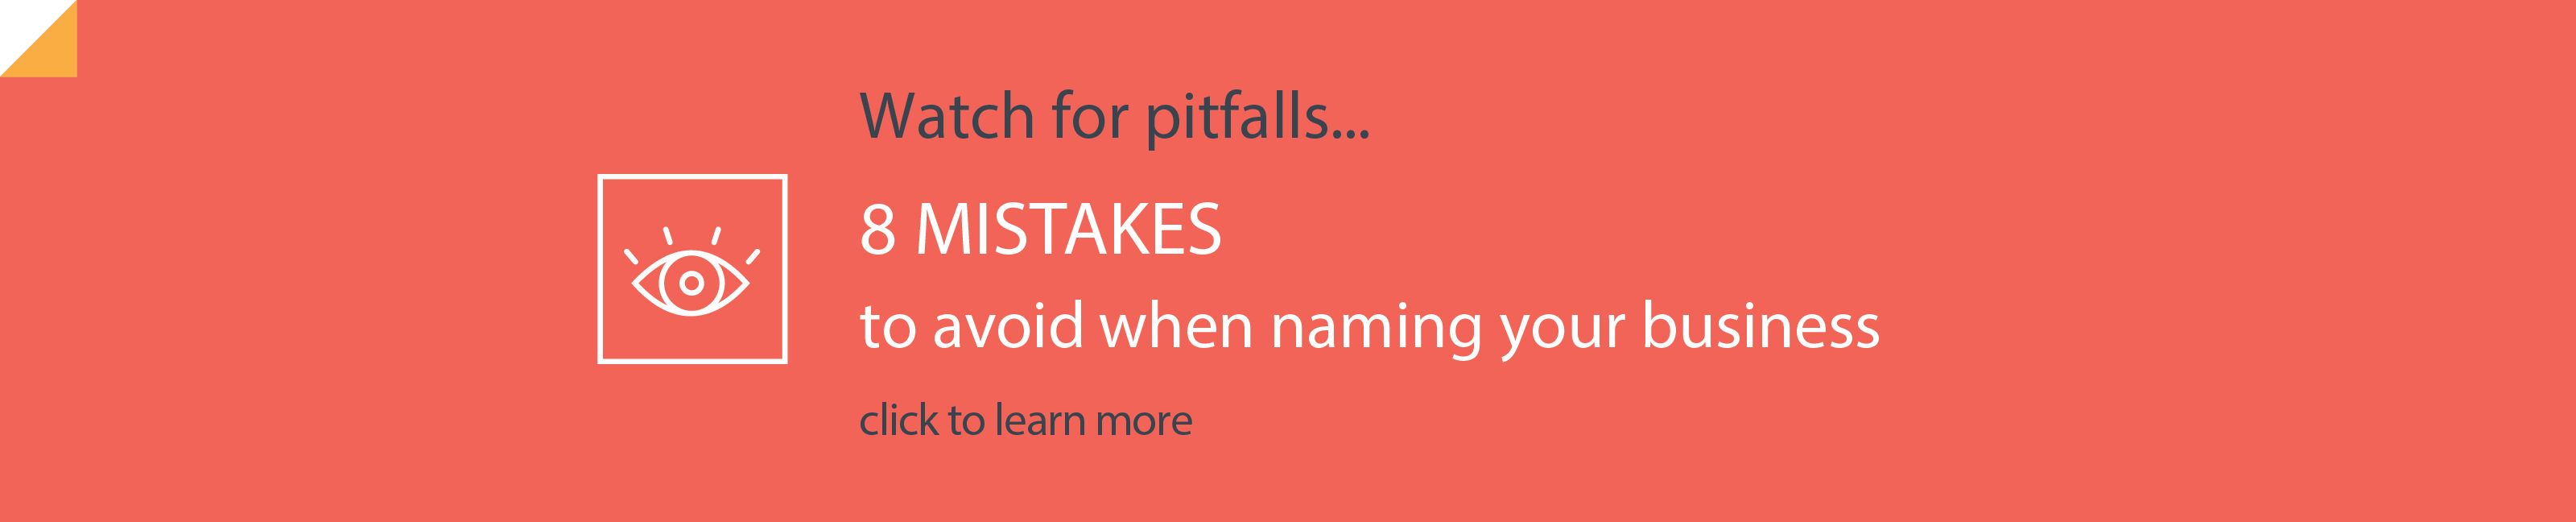 8 Mistakes to avoid when naming your business